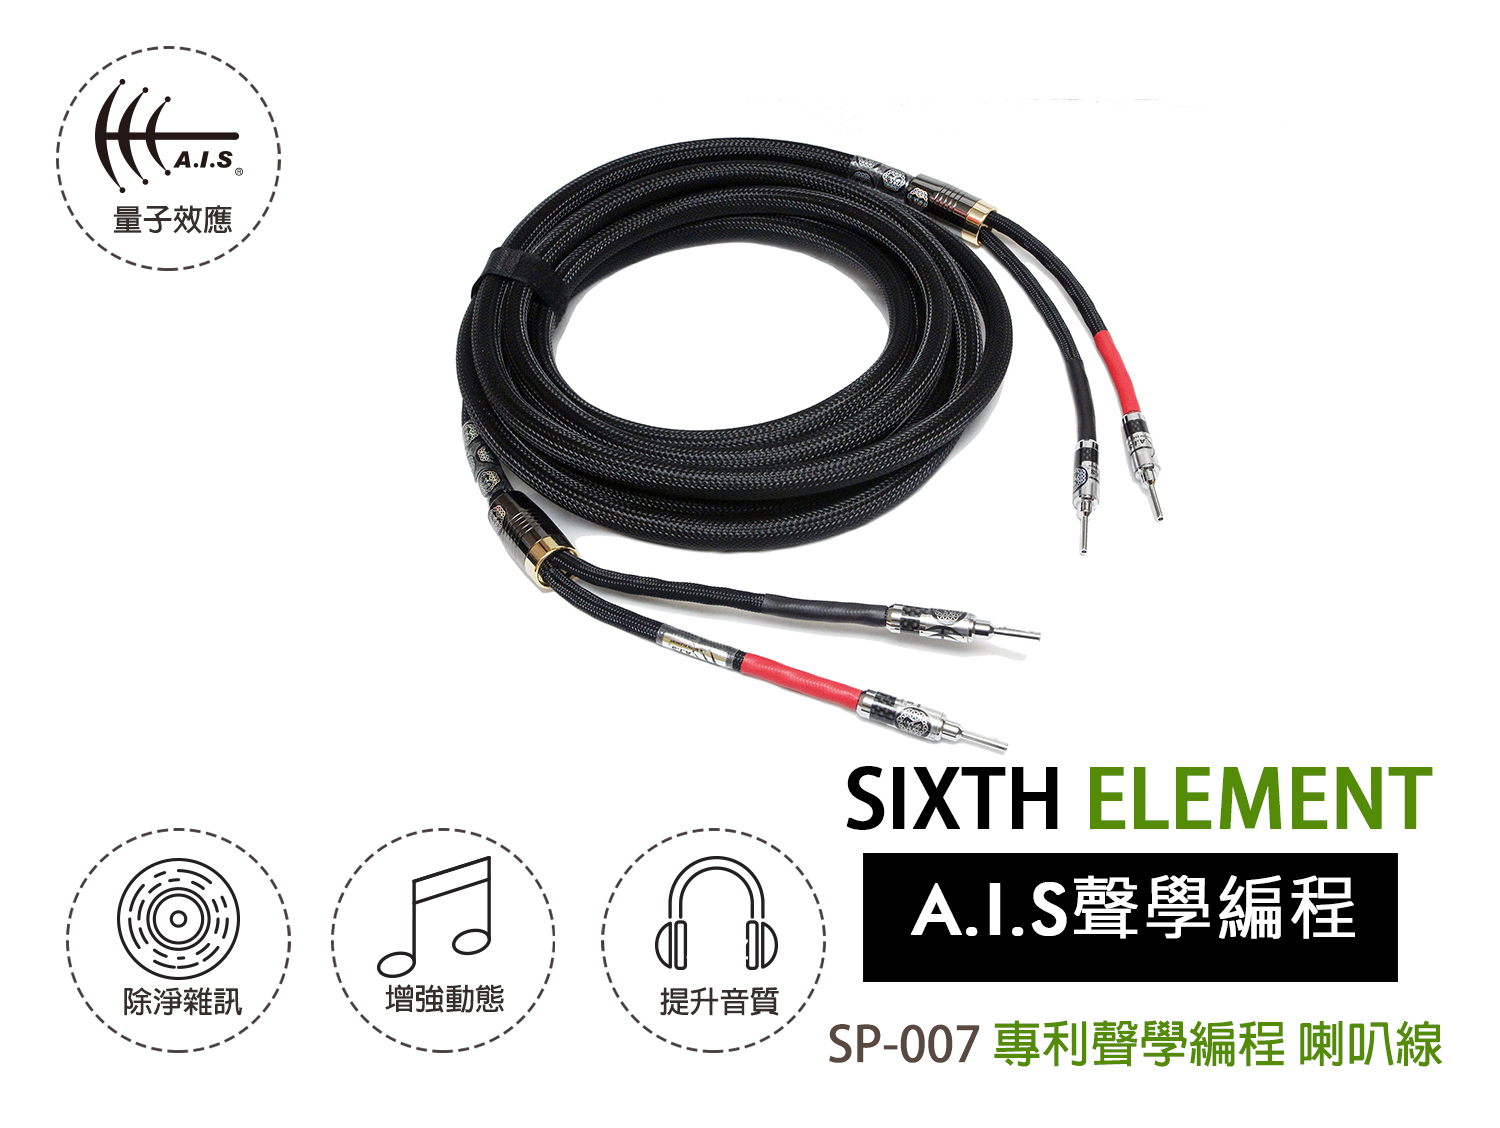 A.I.S聲學編程 SP-007 喇叭線 SP-007 Speaker Cable